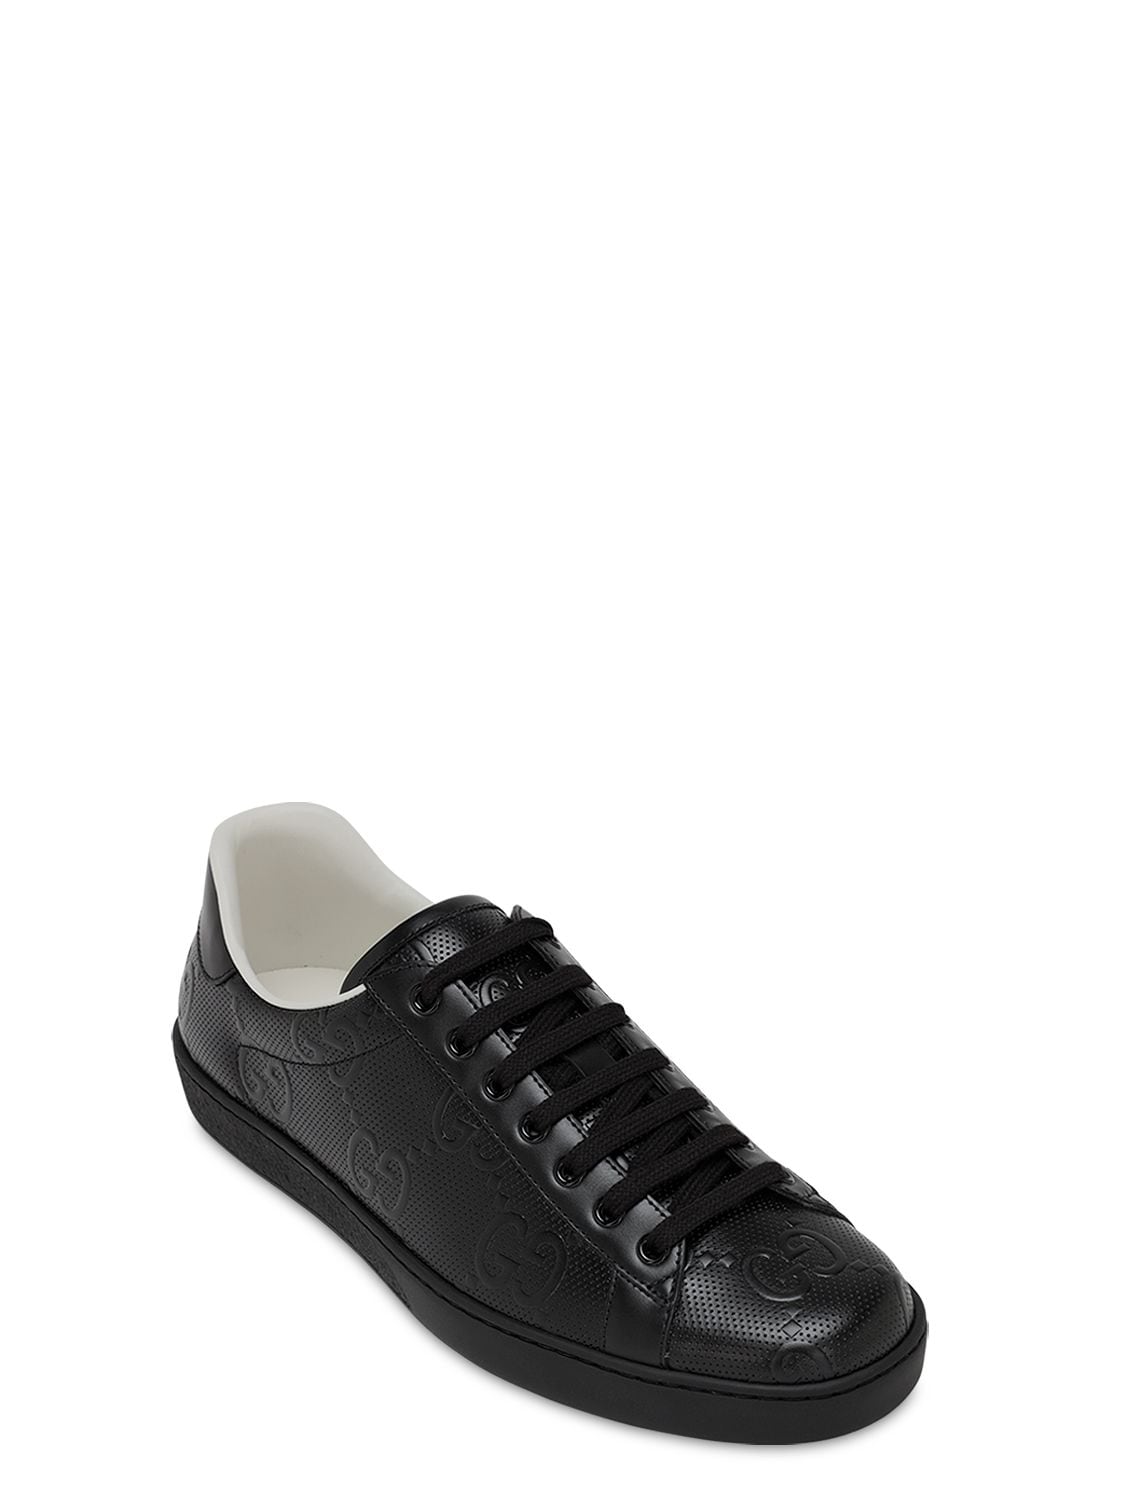 Shop Gucci New Ace Gg Embossed Leather Sneakers In Black